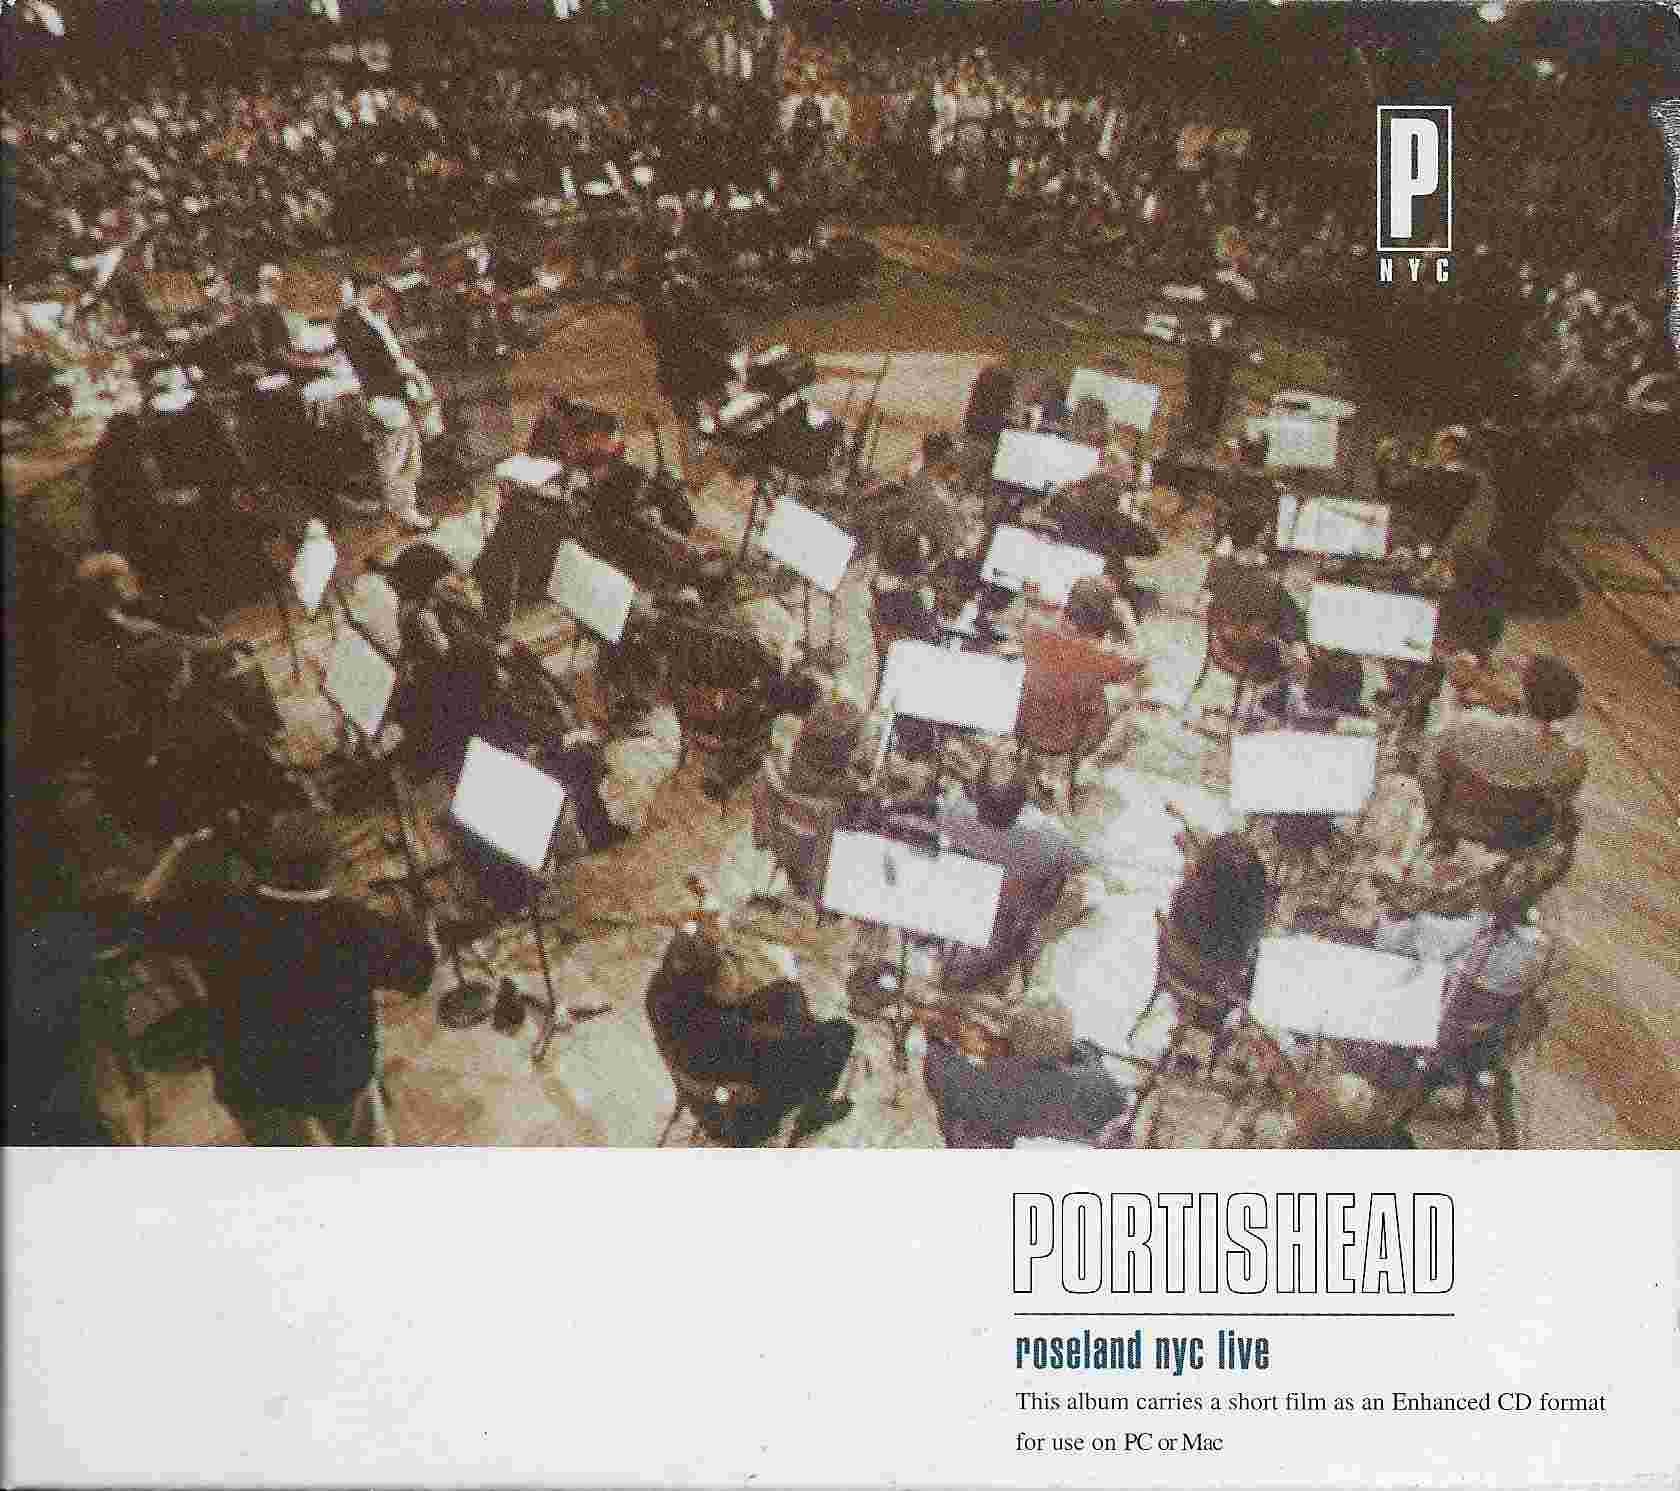 Picture of Roseland NYC - Live by artist Portishead 